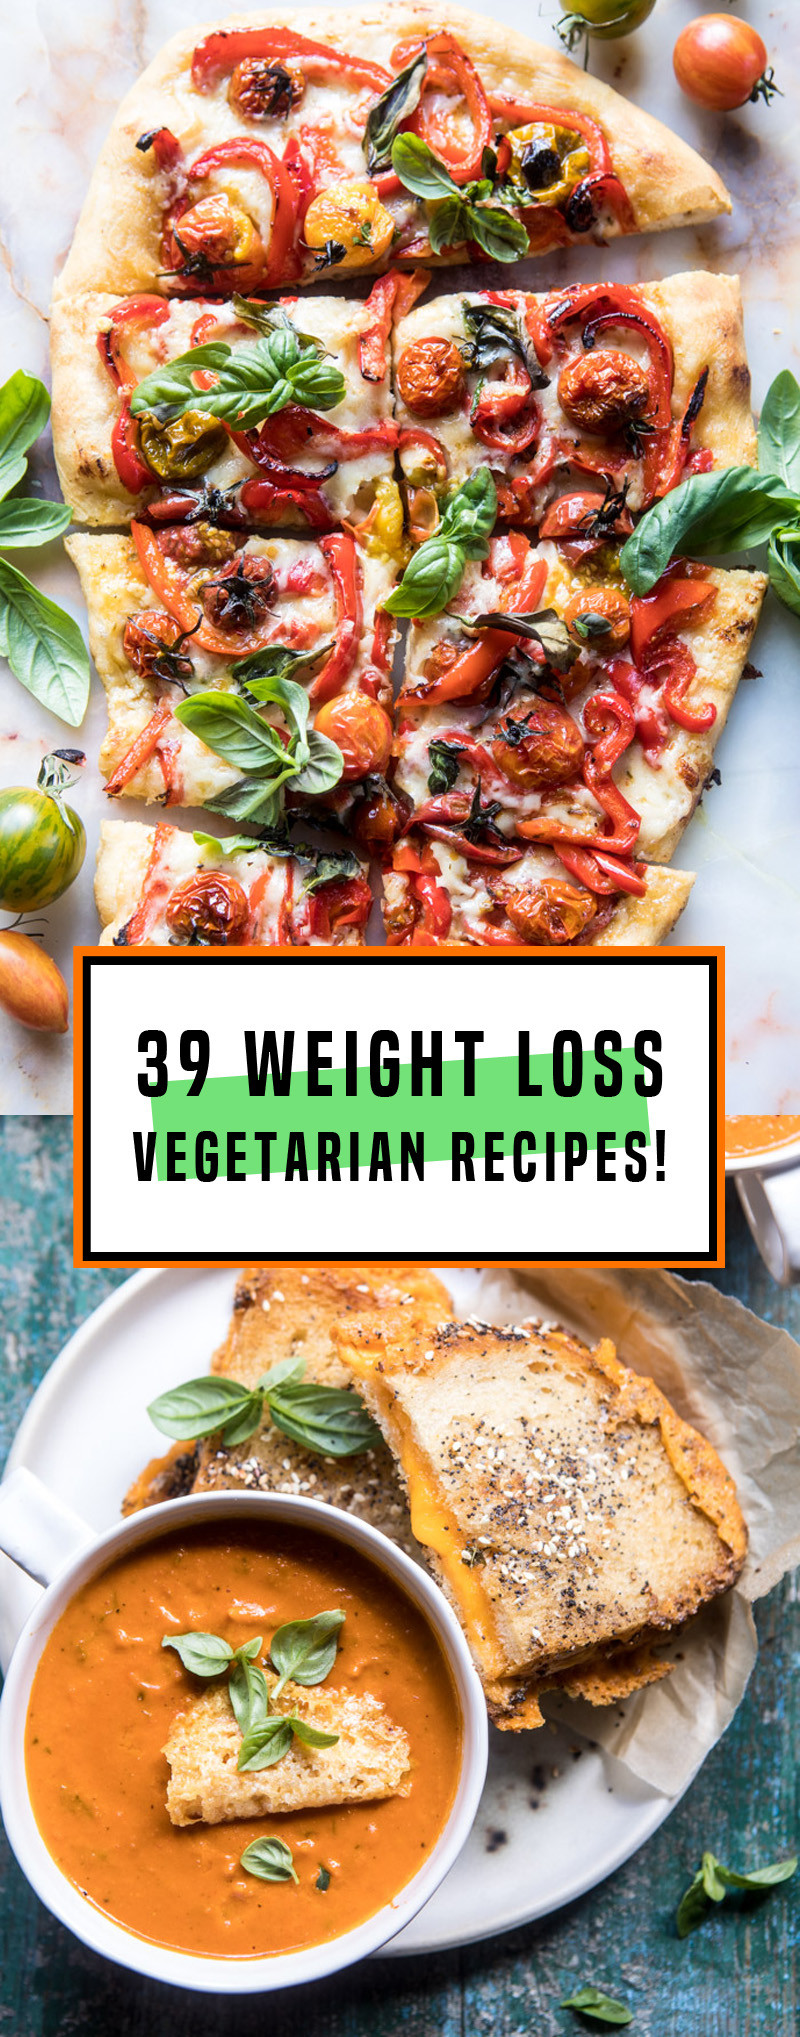 Healthy Vegetarian Dinner Recipes For Weight Loss
 39 Ve arian Weight Loss Recipes That Are Healthy And